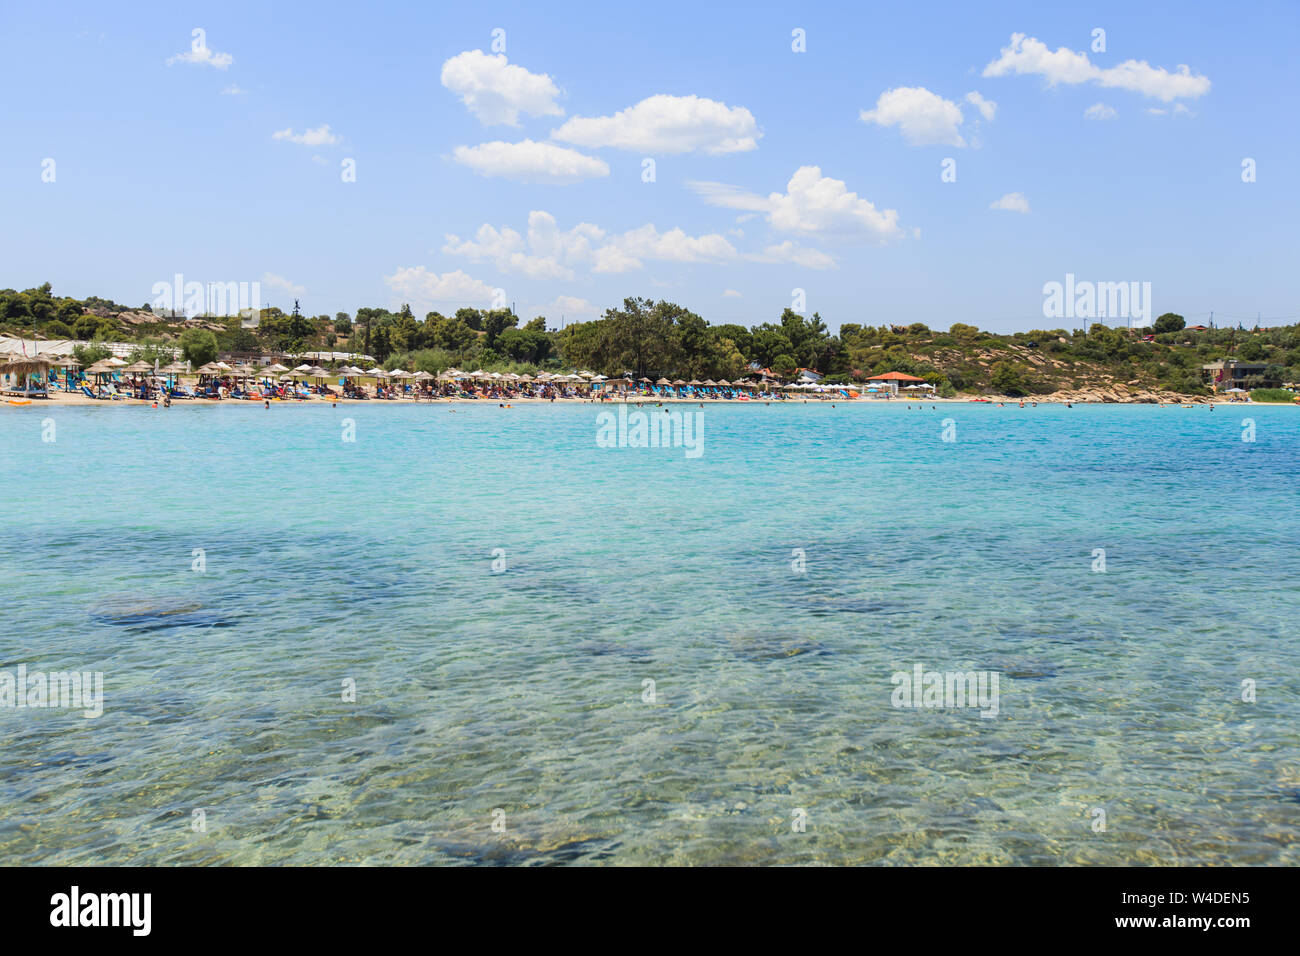 Page 2 - Beach Halkidiki High Resolution Stock Photography and Images -  Alamy